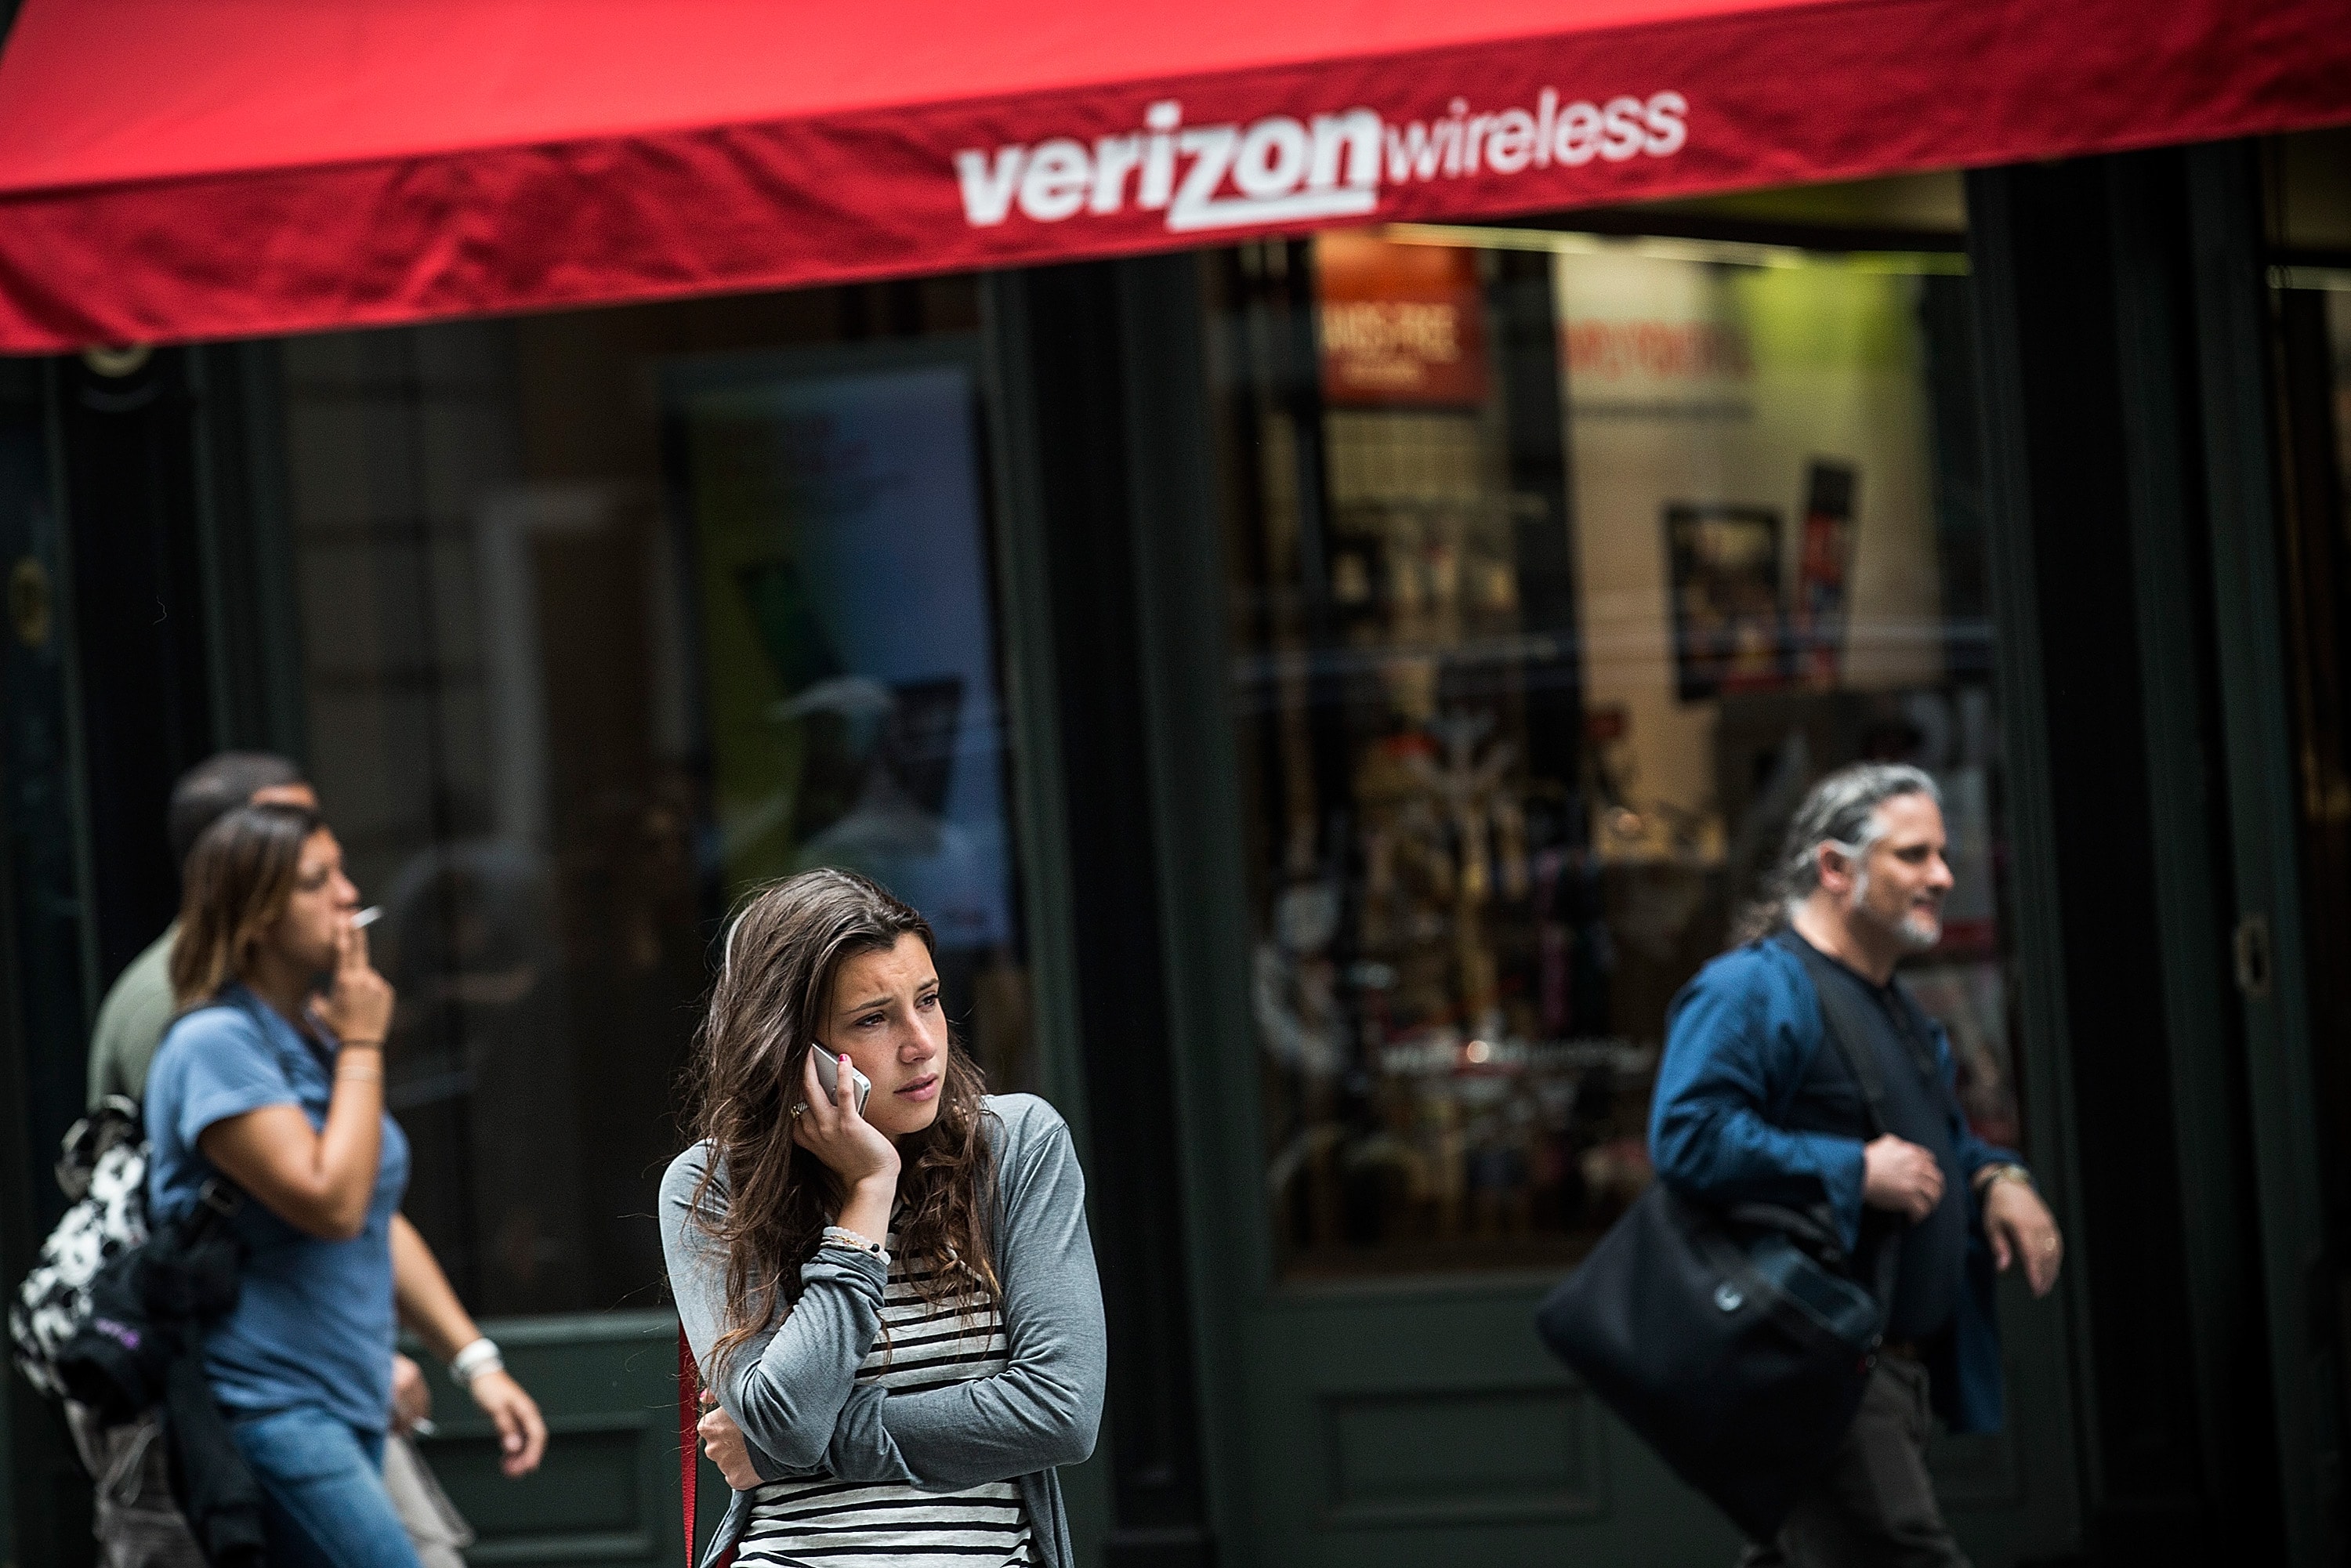 A woman uses her phone in front of a Verizon Store, one of several telecom companies police could force to disclose customer location and data under the Kelsey Smith Act, New York, United States, 2013, Andrew Burton/Getty Images